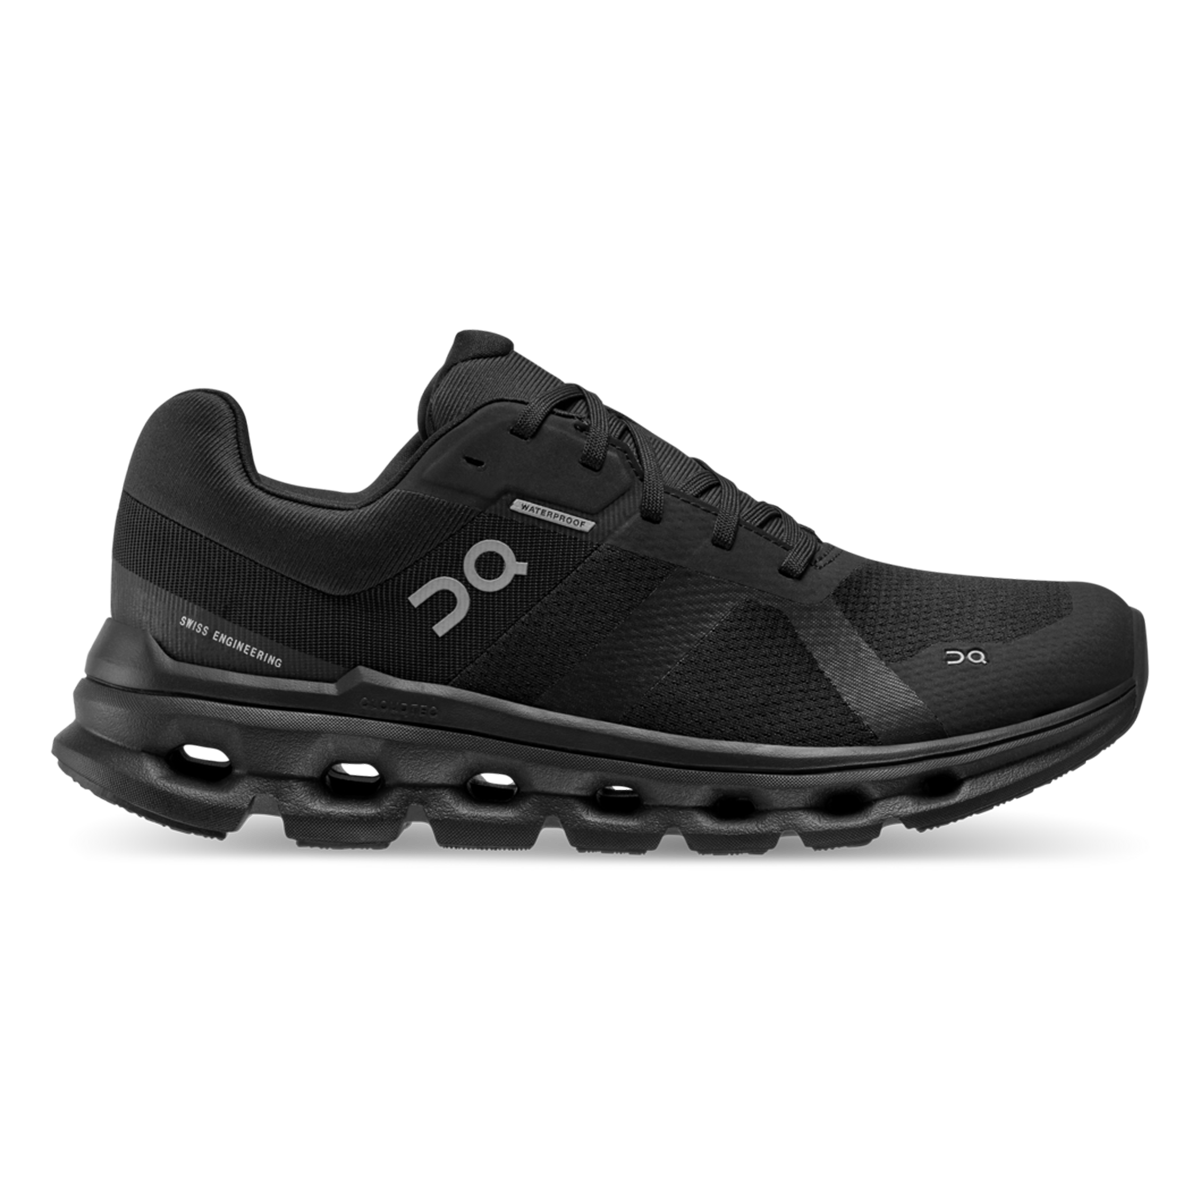 ON Cloudrunner Waterproof, , large image number null